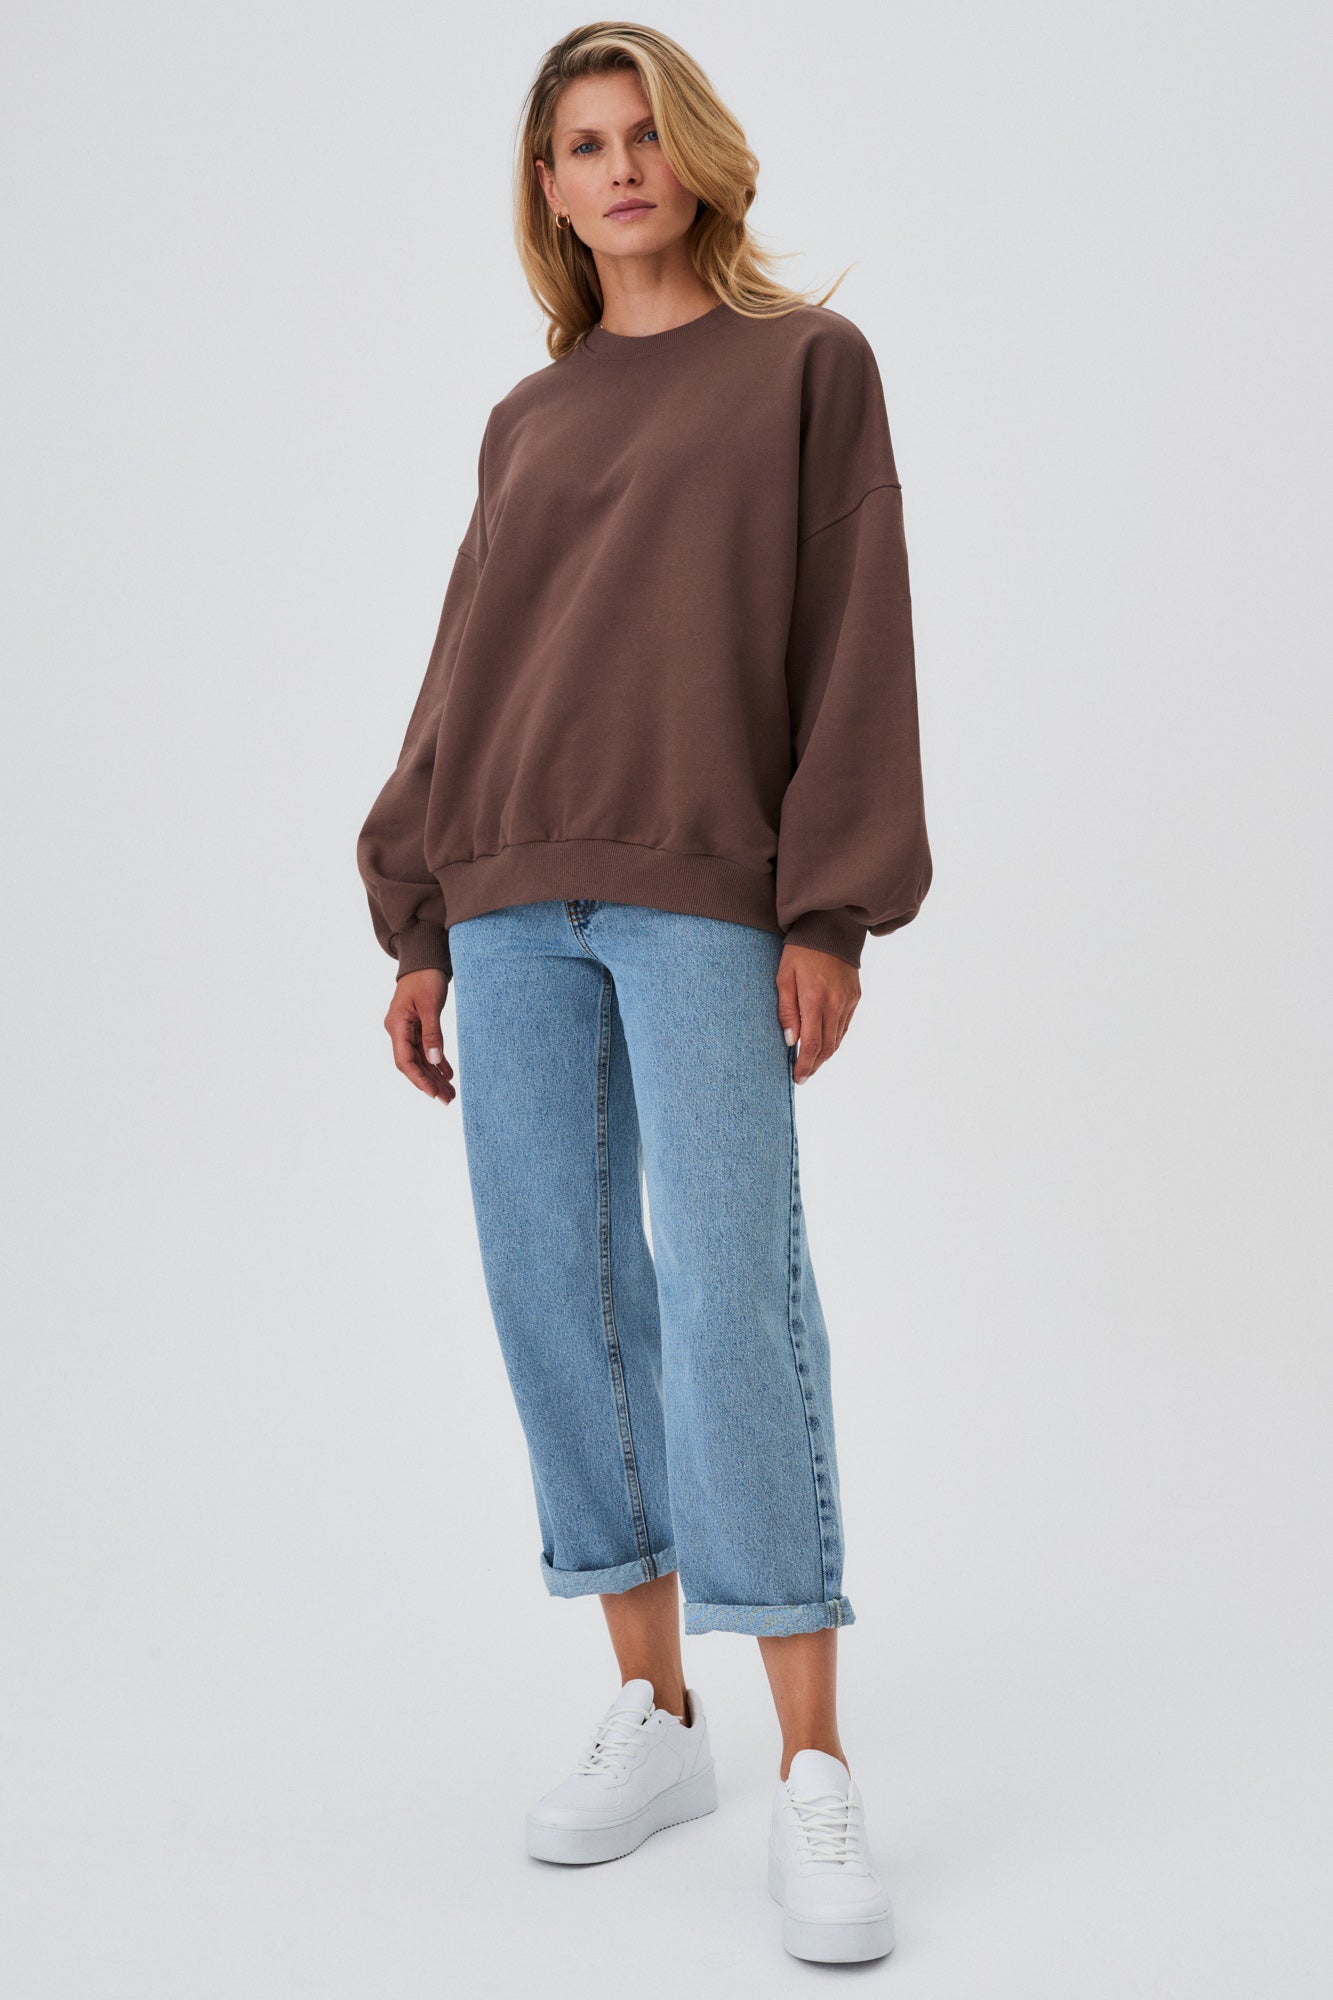 Sweatshirt in organic cotton / 17 / 12 / hazelnut *cropped-jeans-from-recycled-cotton-05-12-light-indigo* ?The model is 177cm tall and wears size XS/S? |